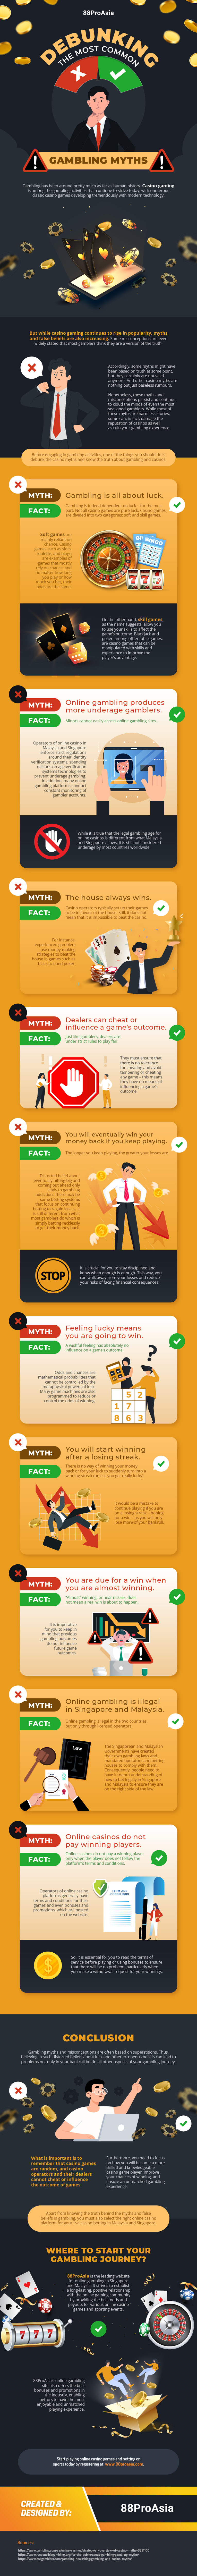 Debunking the Most Common Gambling Myths 01